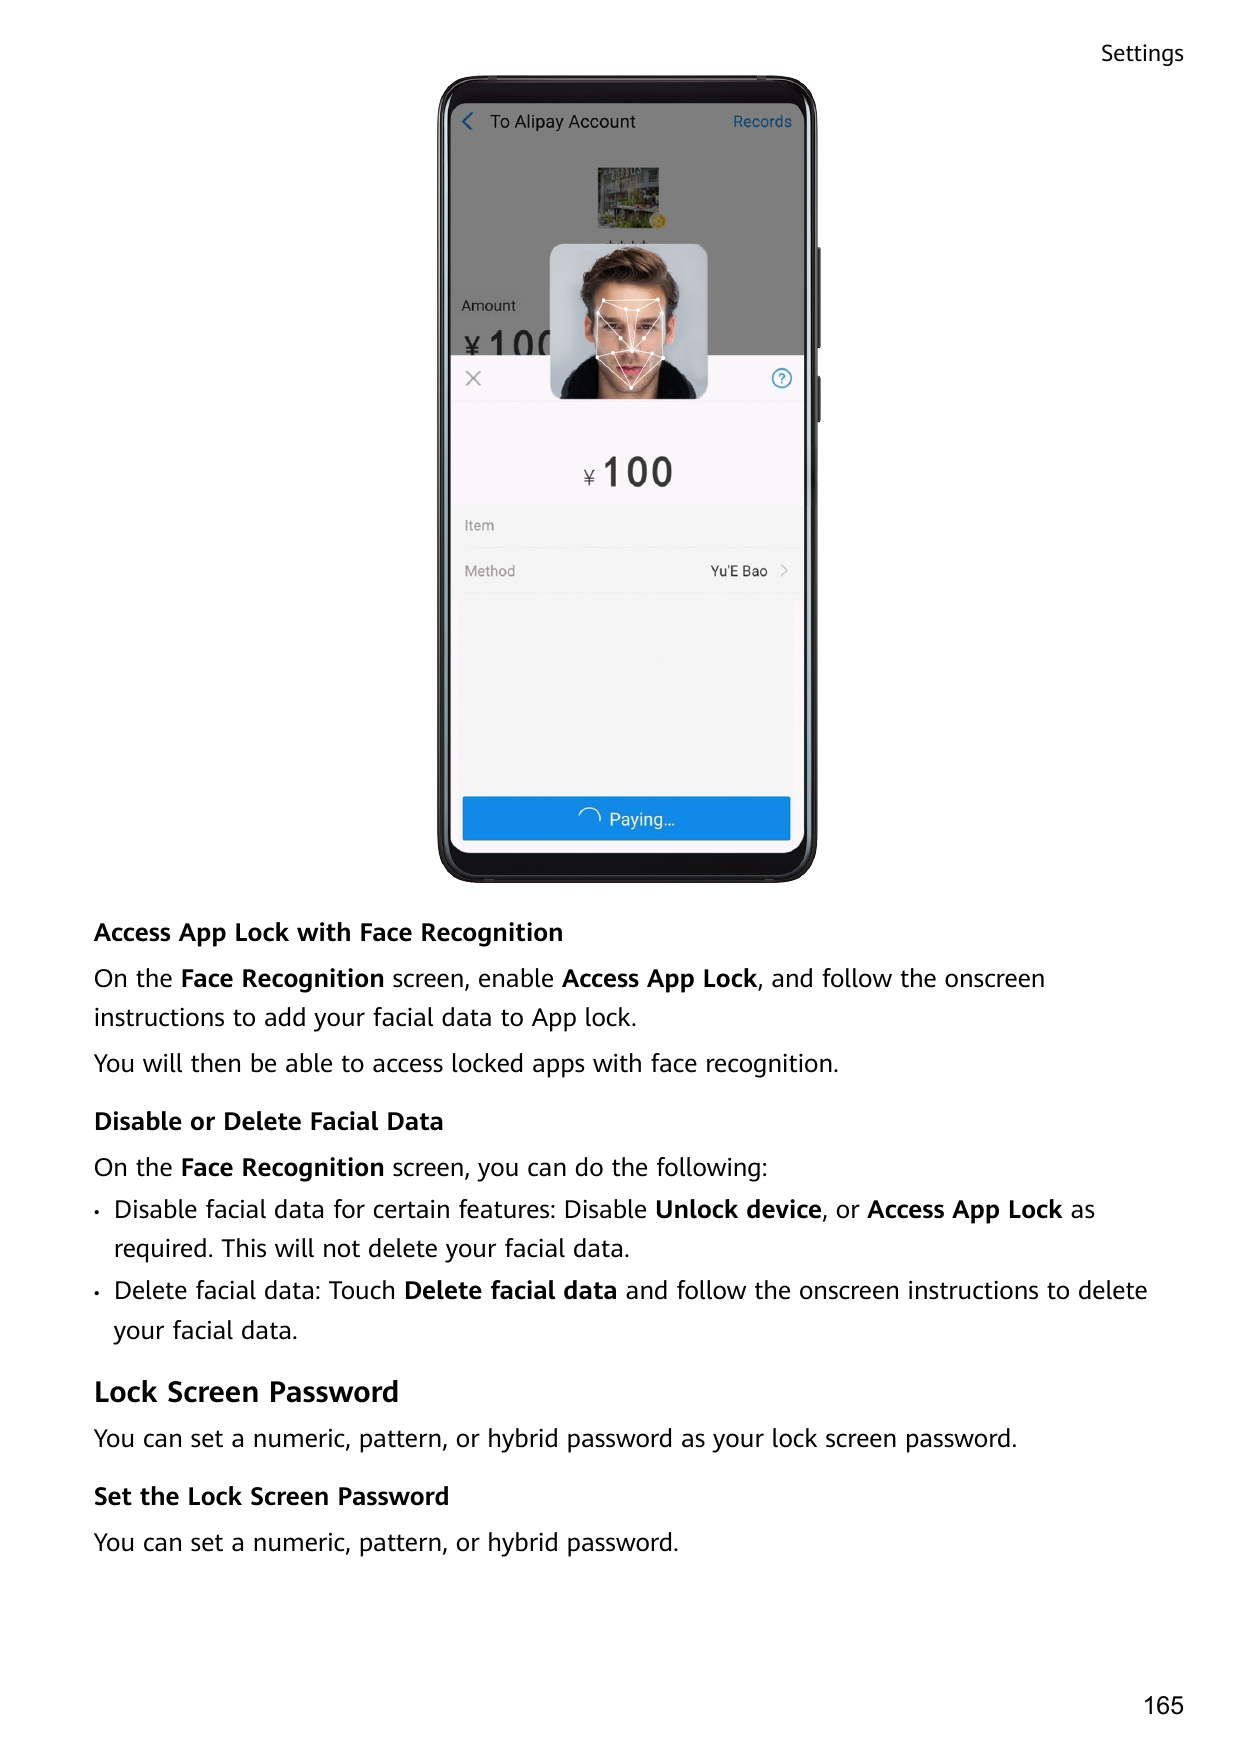 SettingsAccess App Lock with Face RecognitionOn the Face Recognition screen, enable Access App Lock, and follow the onscreeninst